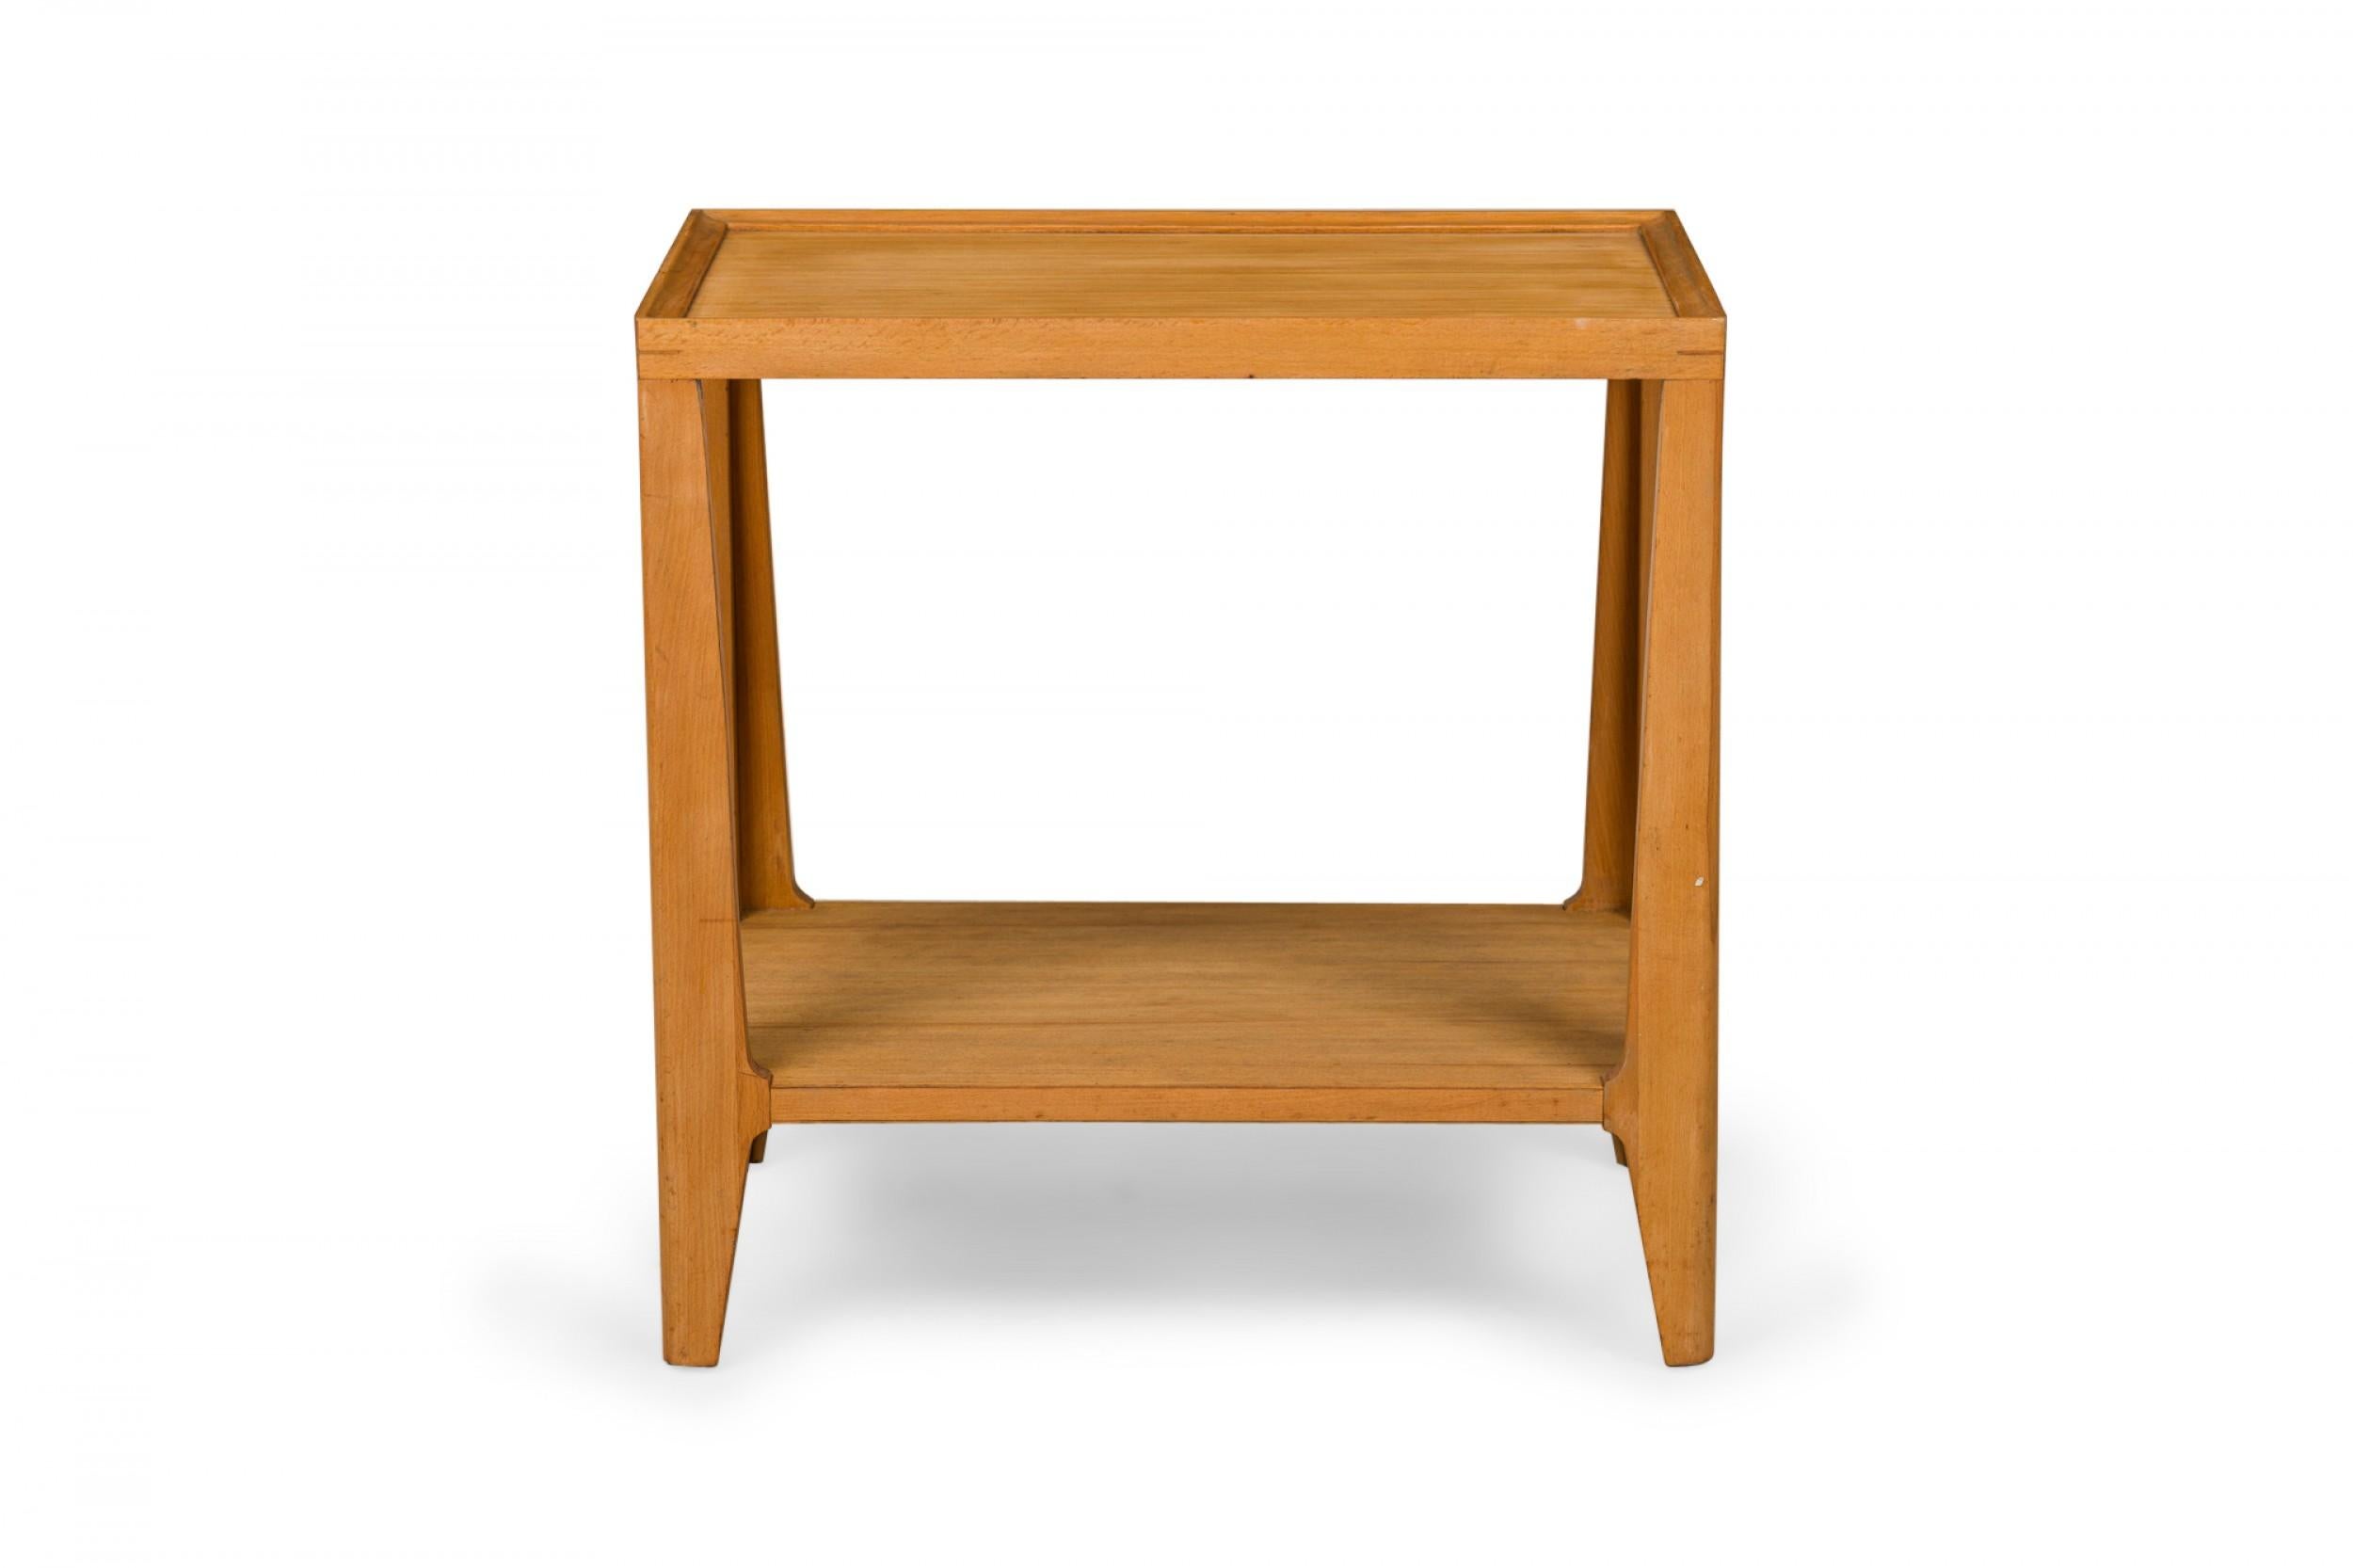 American mid-century rectangular end side table with a rectangular top with a shallow beveled lip and lower stretcher shelf supported by a four-leg frame ending in tapered corner feet. (EDWARD WORMLEY FOR DREXEL)